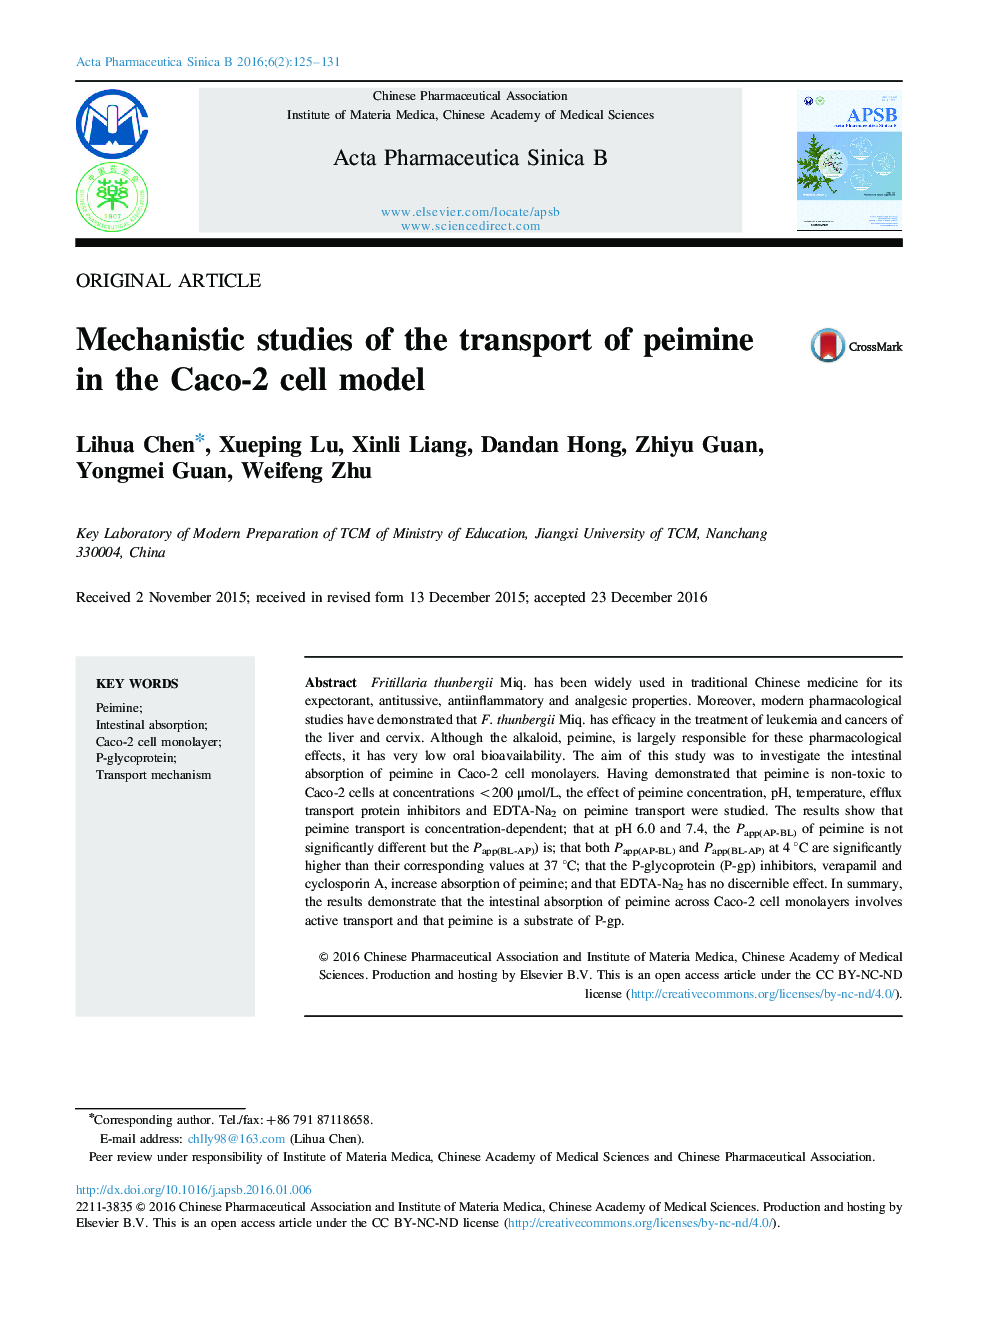 Mechanistic studies of the transport of peimine in the Caco-2 cell model 